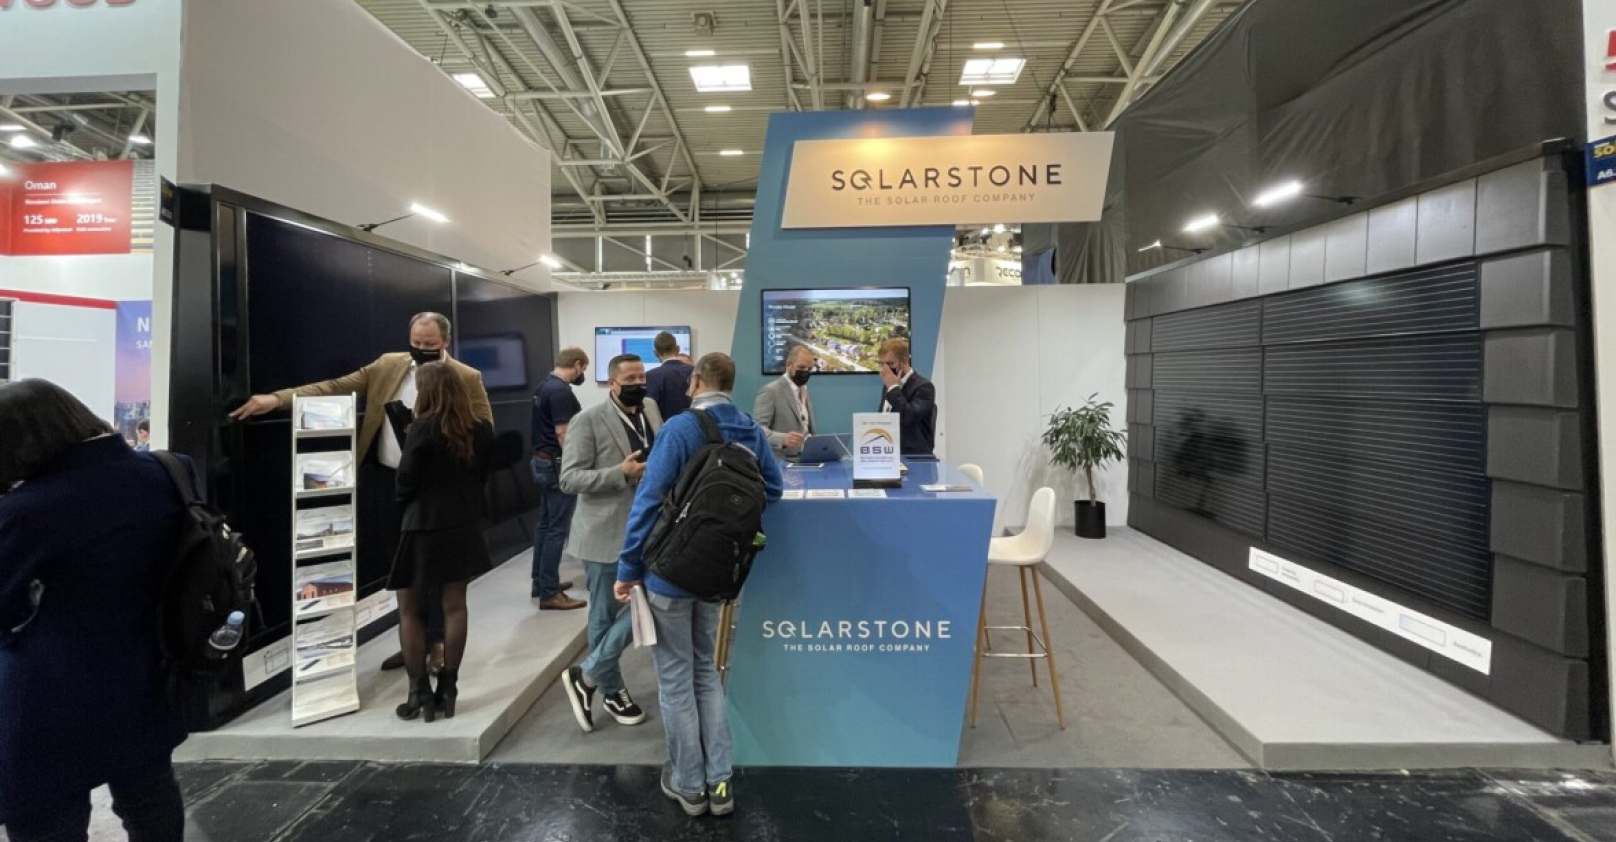 solarstone booth at intersolar europe